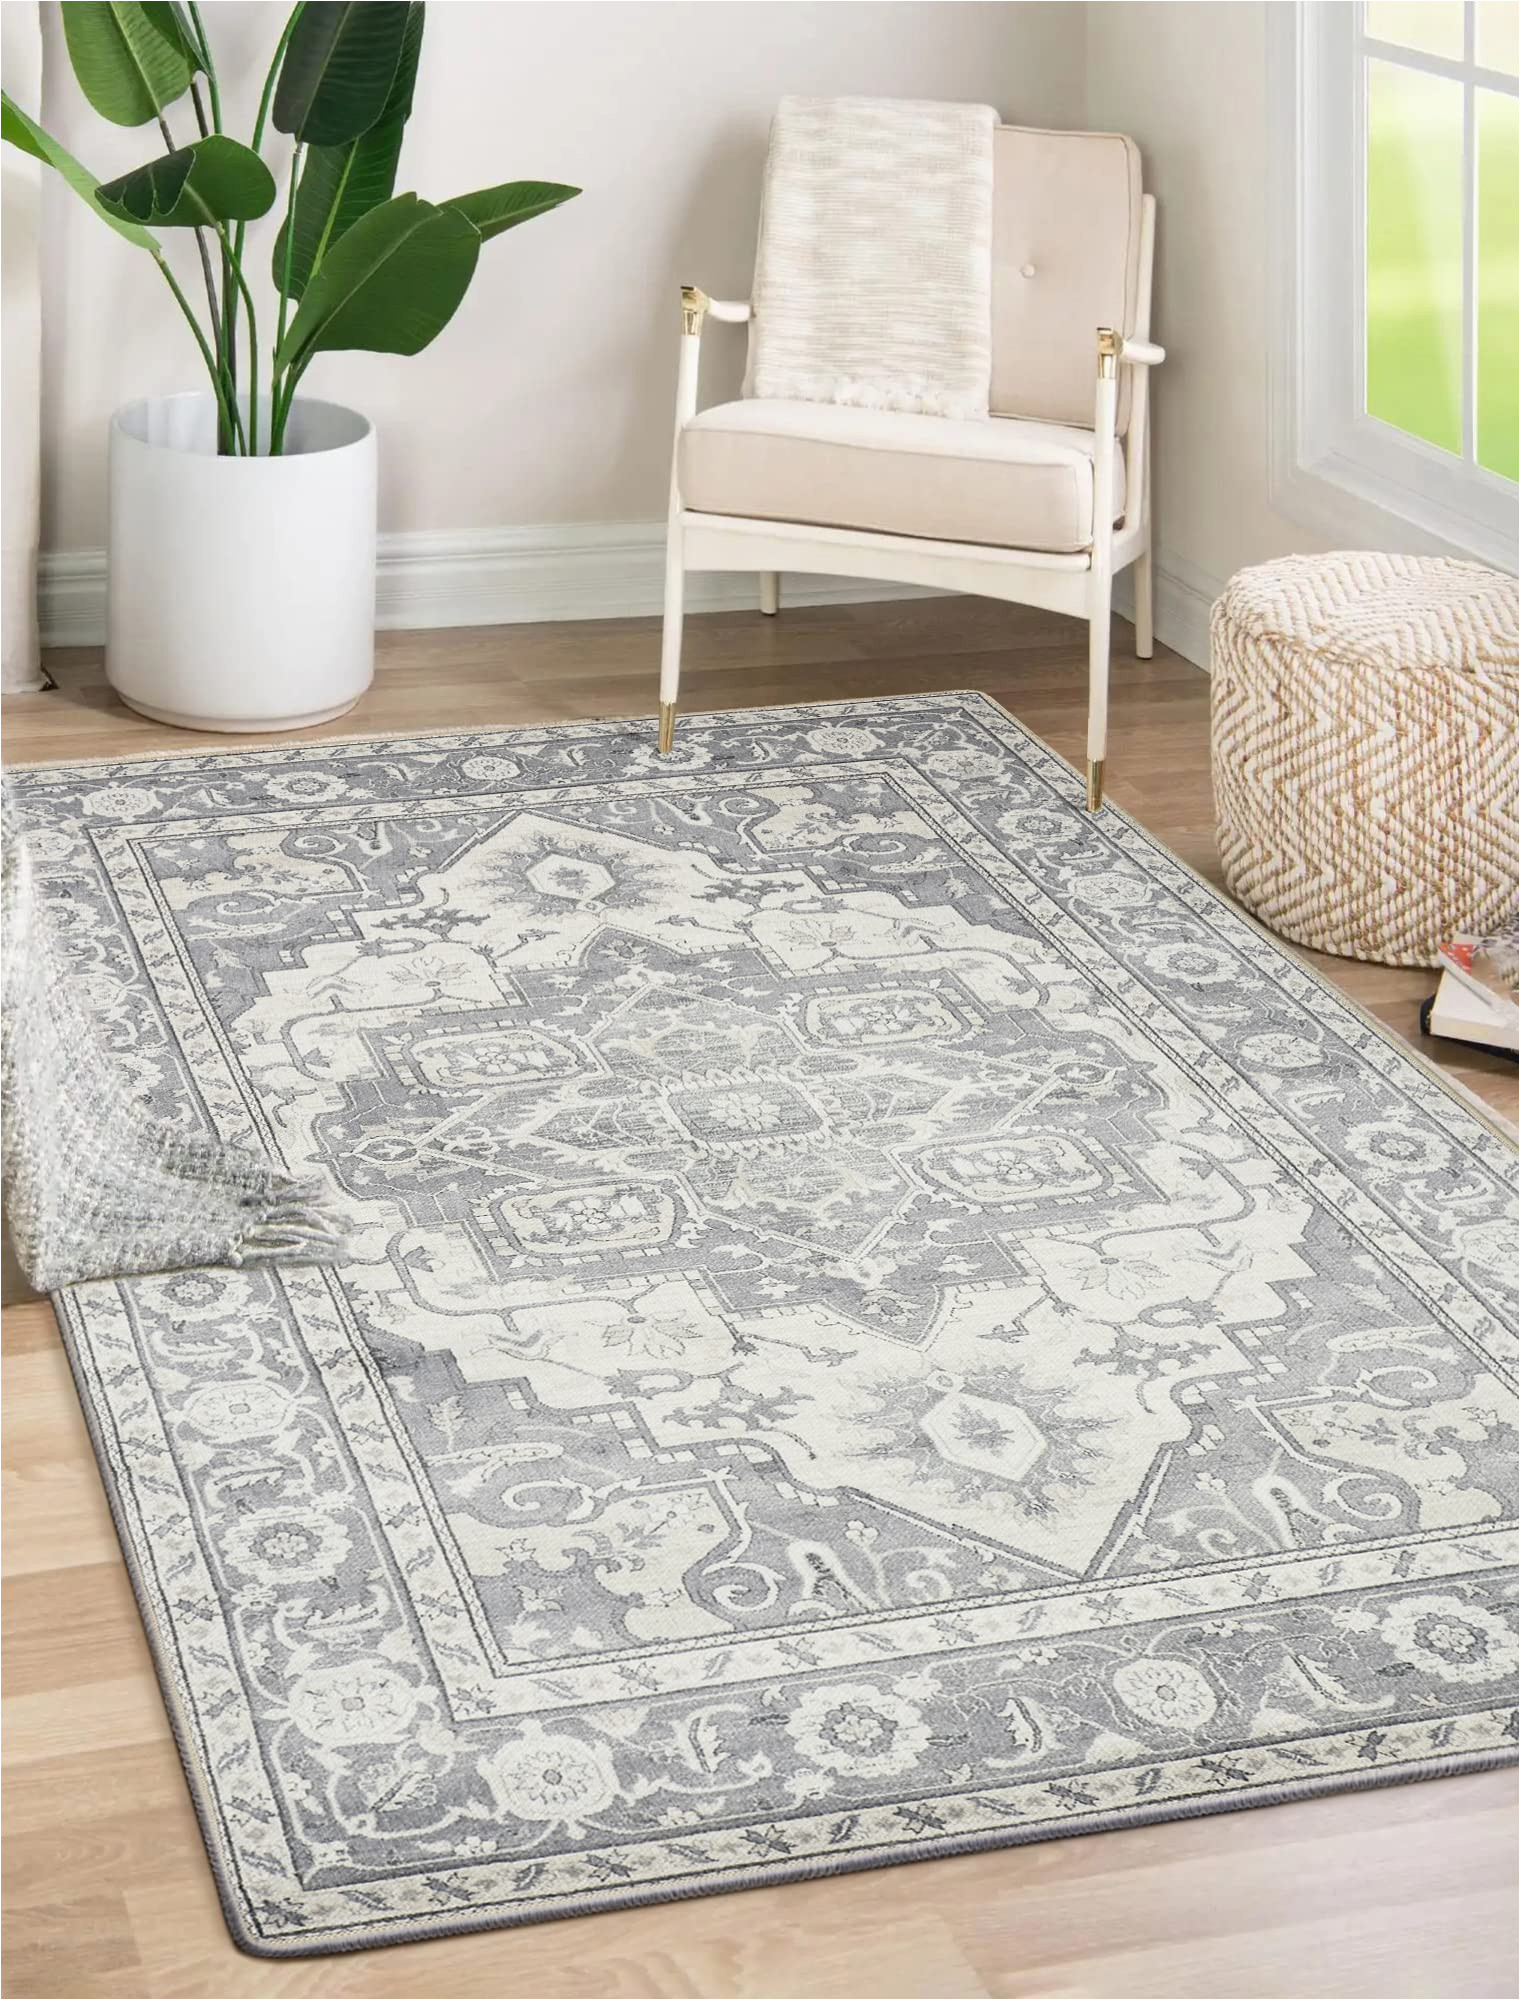 Washable Rubber Backed area Rugs Stain Resistant Washable area Rugs Rubber Backing- No Crease Printed Persian Rug – Bedroom Kitchen Living & Dining Room Carpet Mat – Vintage Floor …